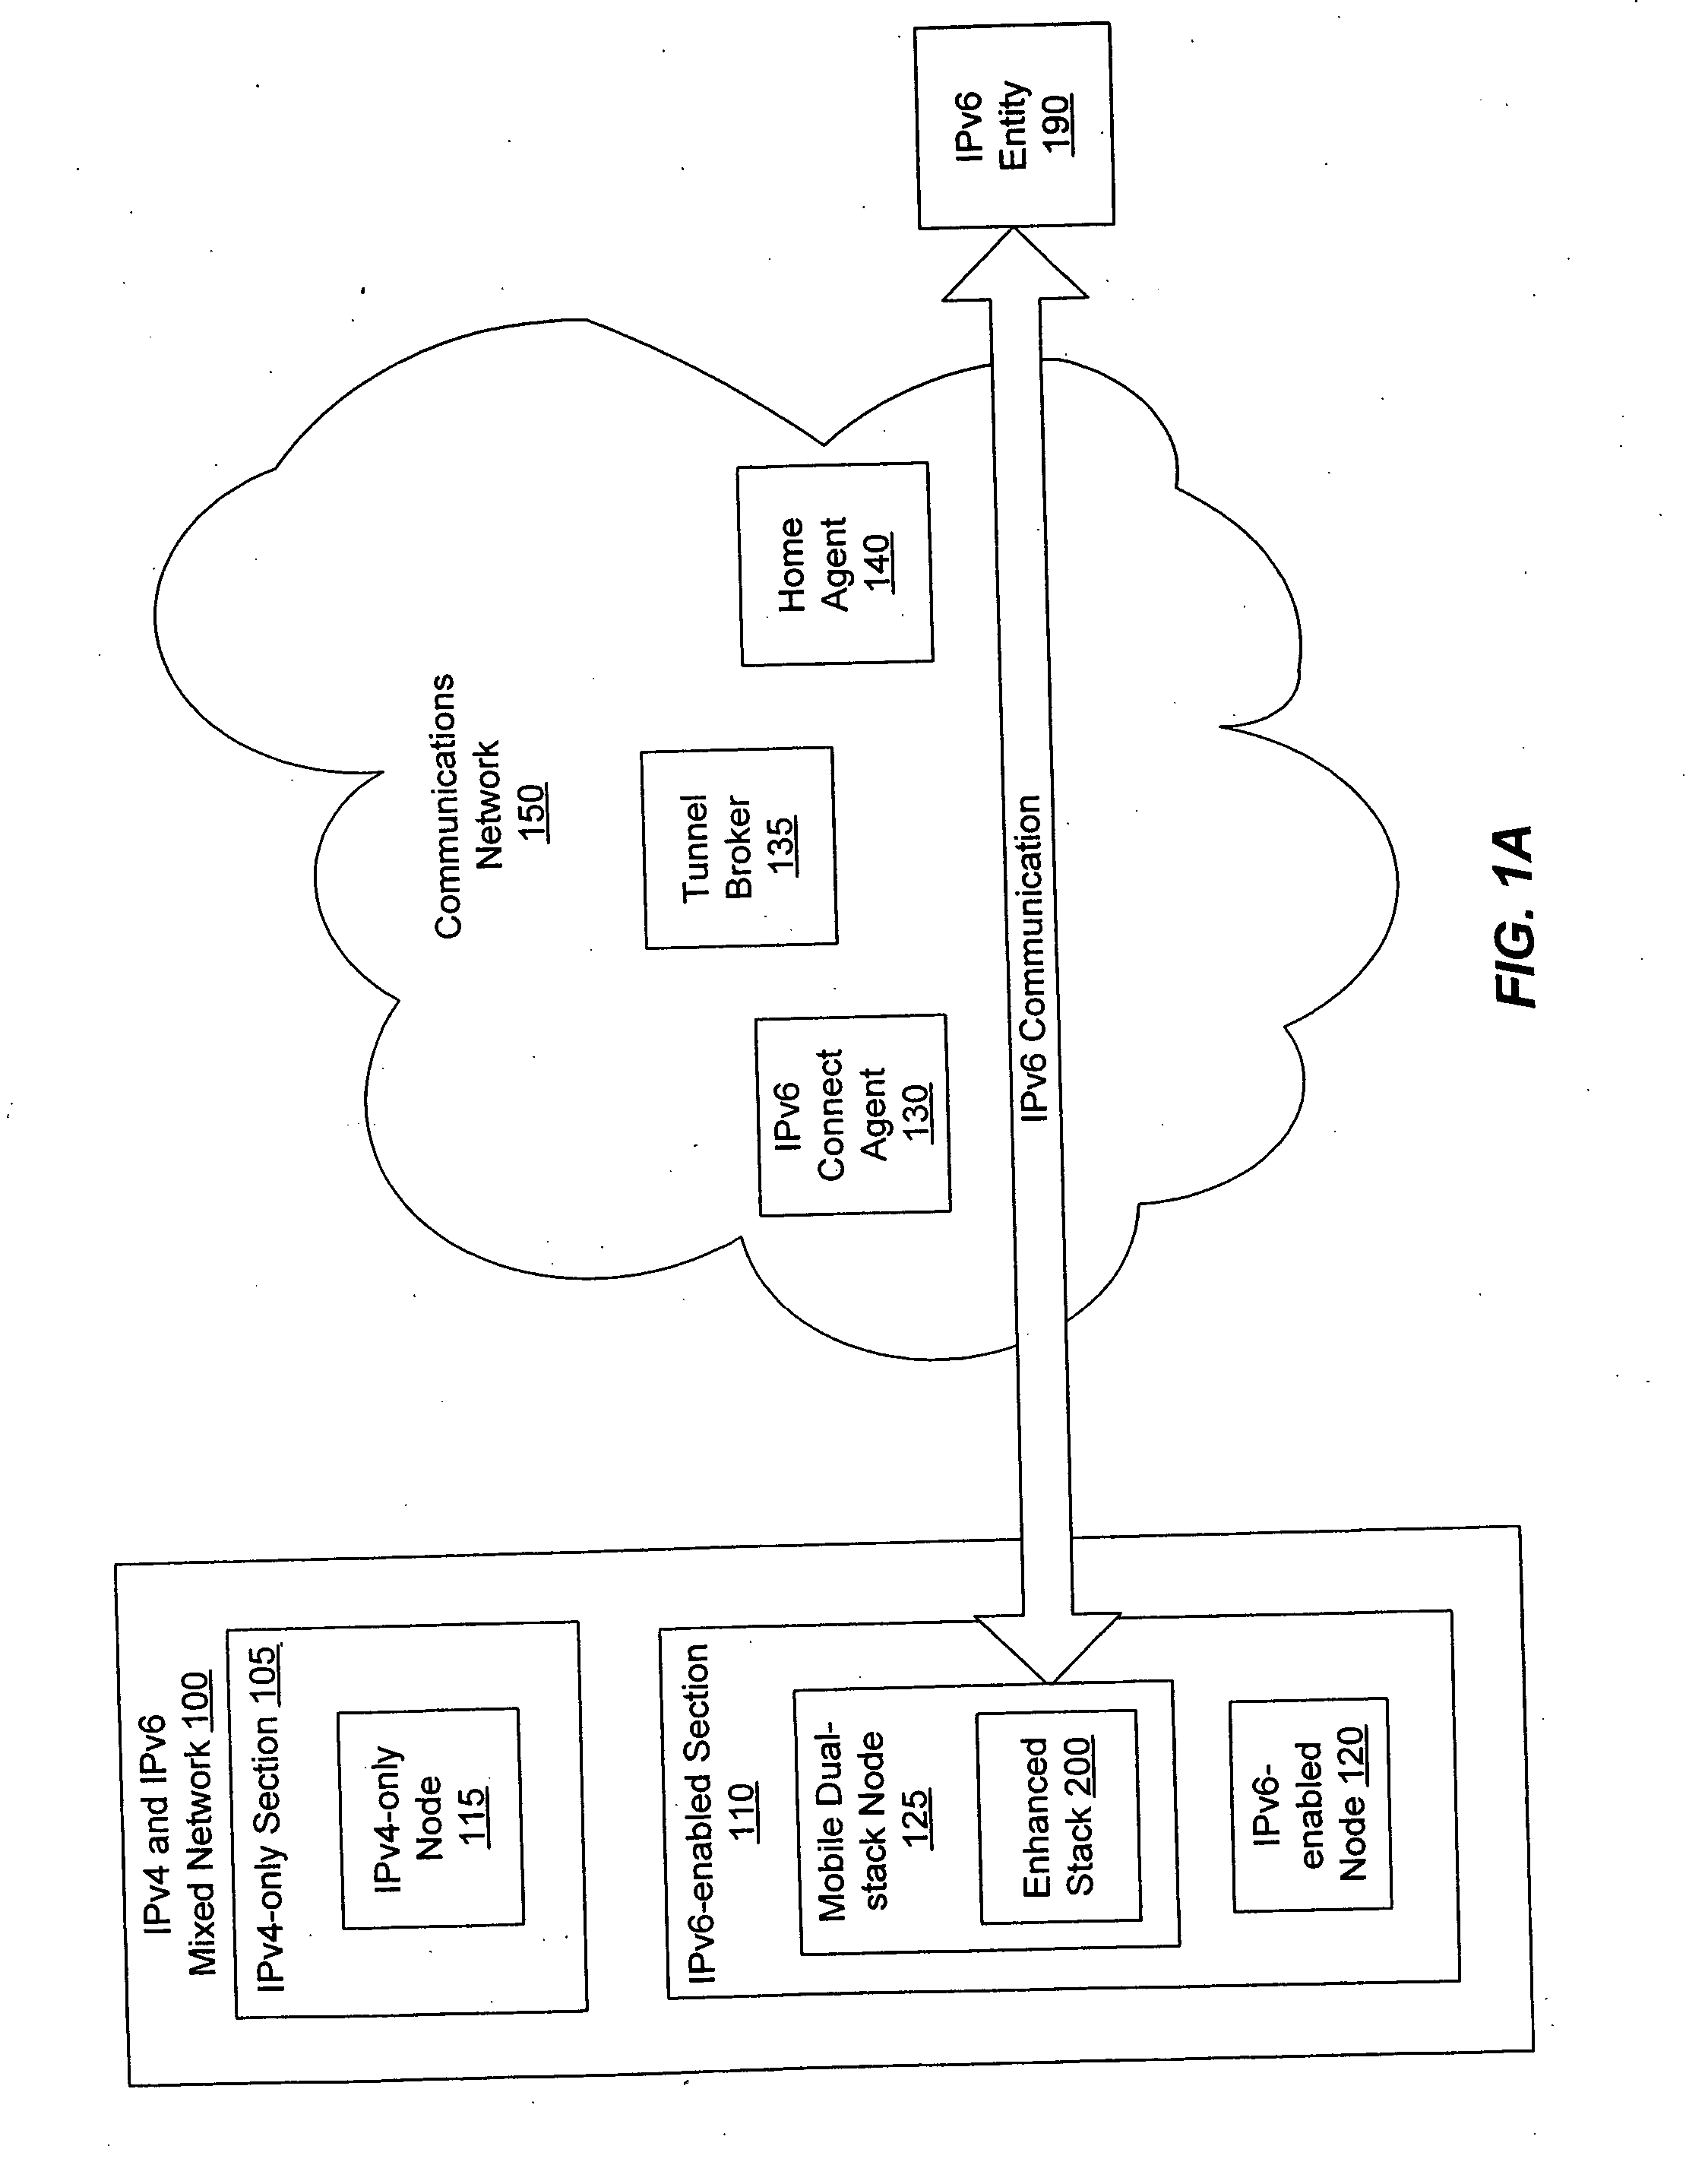 Enabling mobile IPv6 communication over a network containing IPv4 components using a tunnel broker model